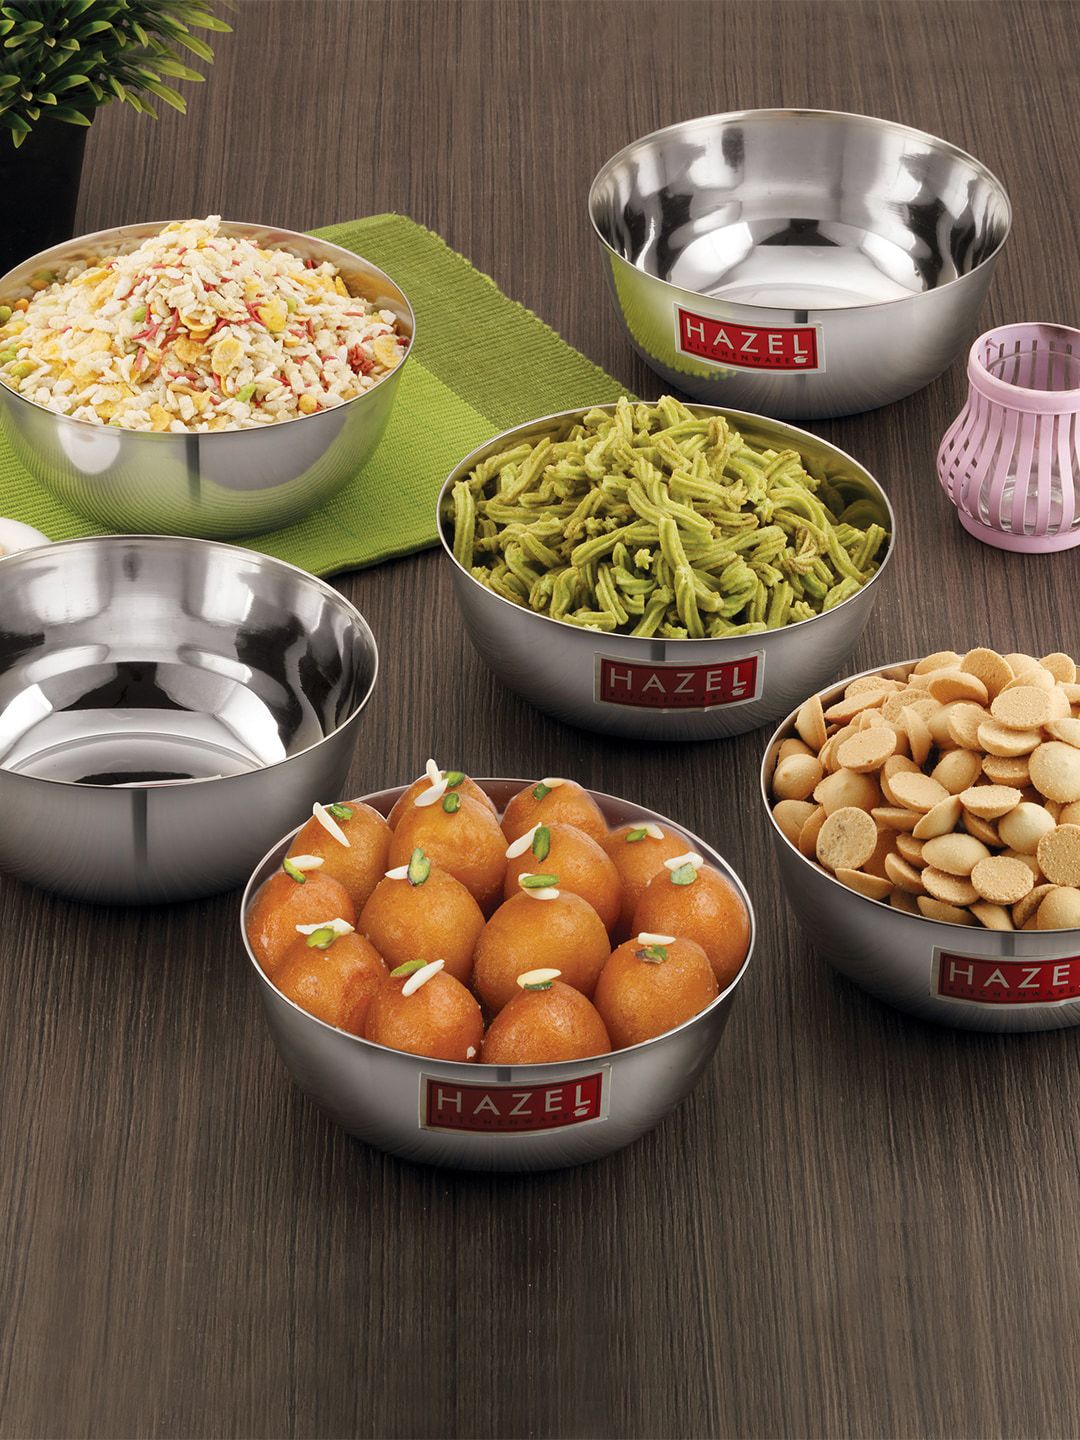 HAZEL Set Of 6 Silver- Colored Solid Stainless Steel Serving Bowl Price in India